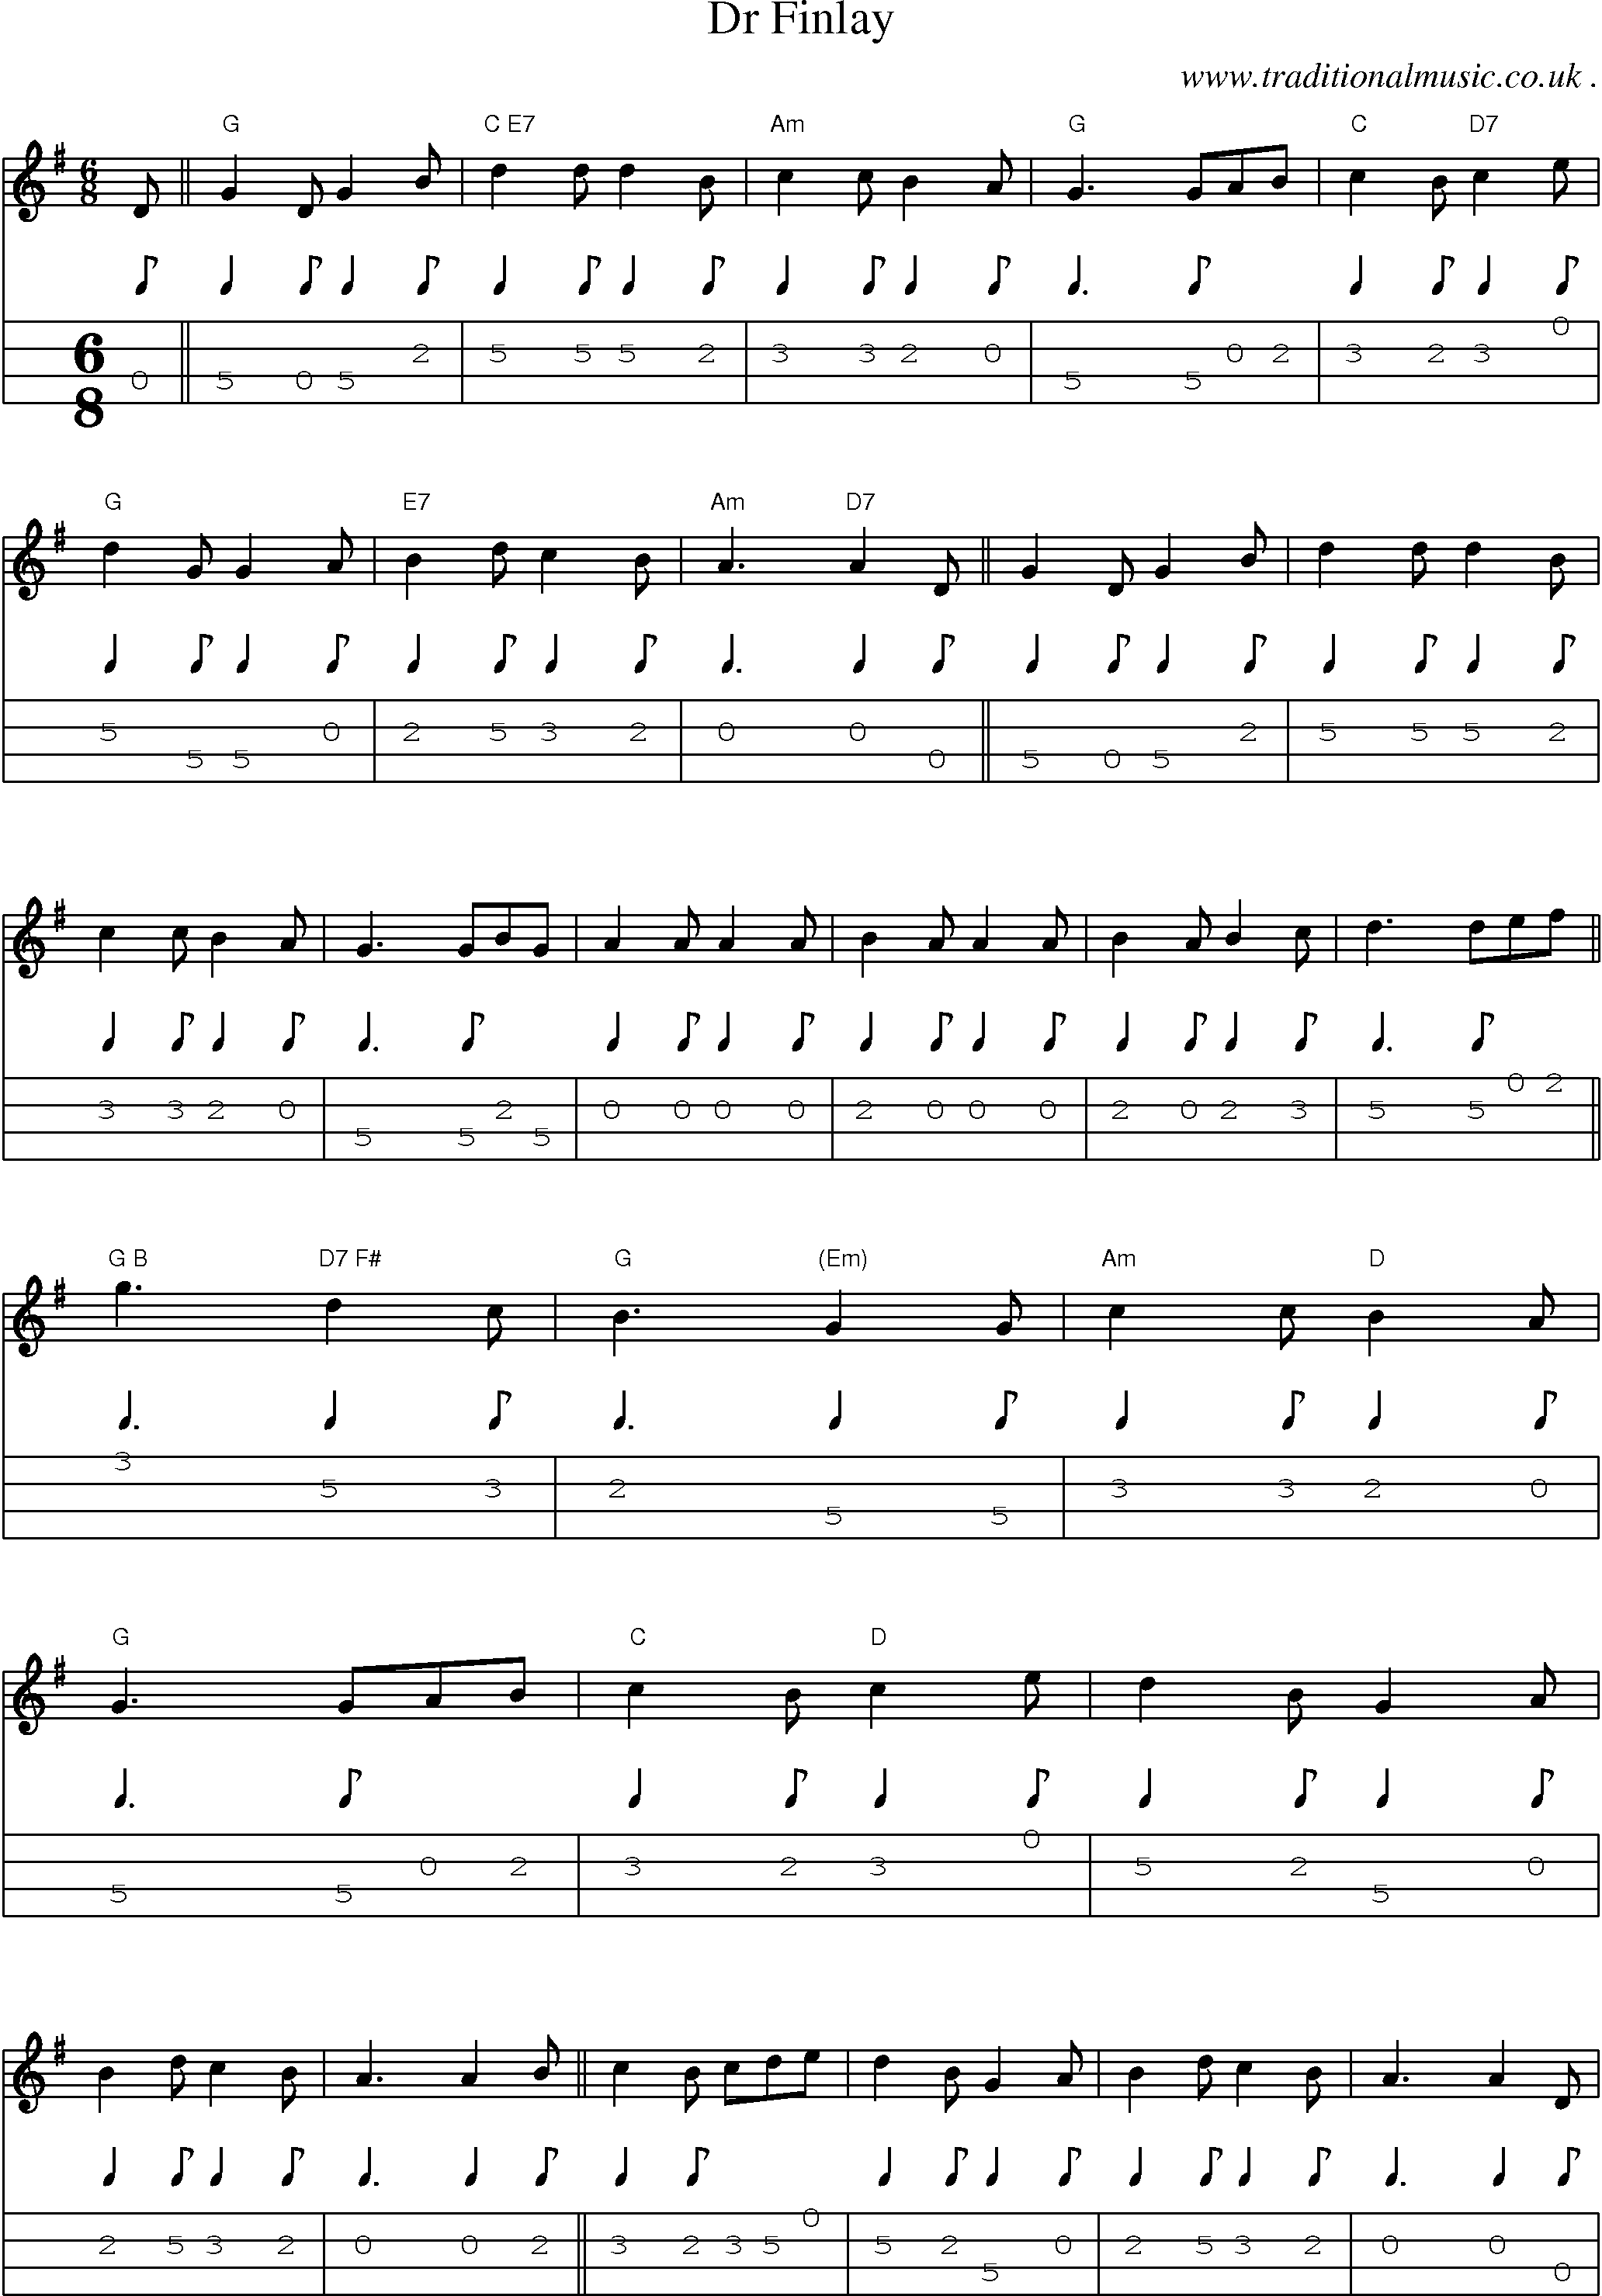 Sheet-music  score, Chords and Mandolin Tabs for Dr Finlay